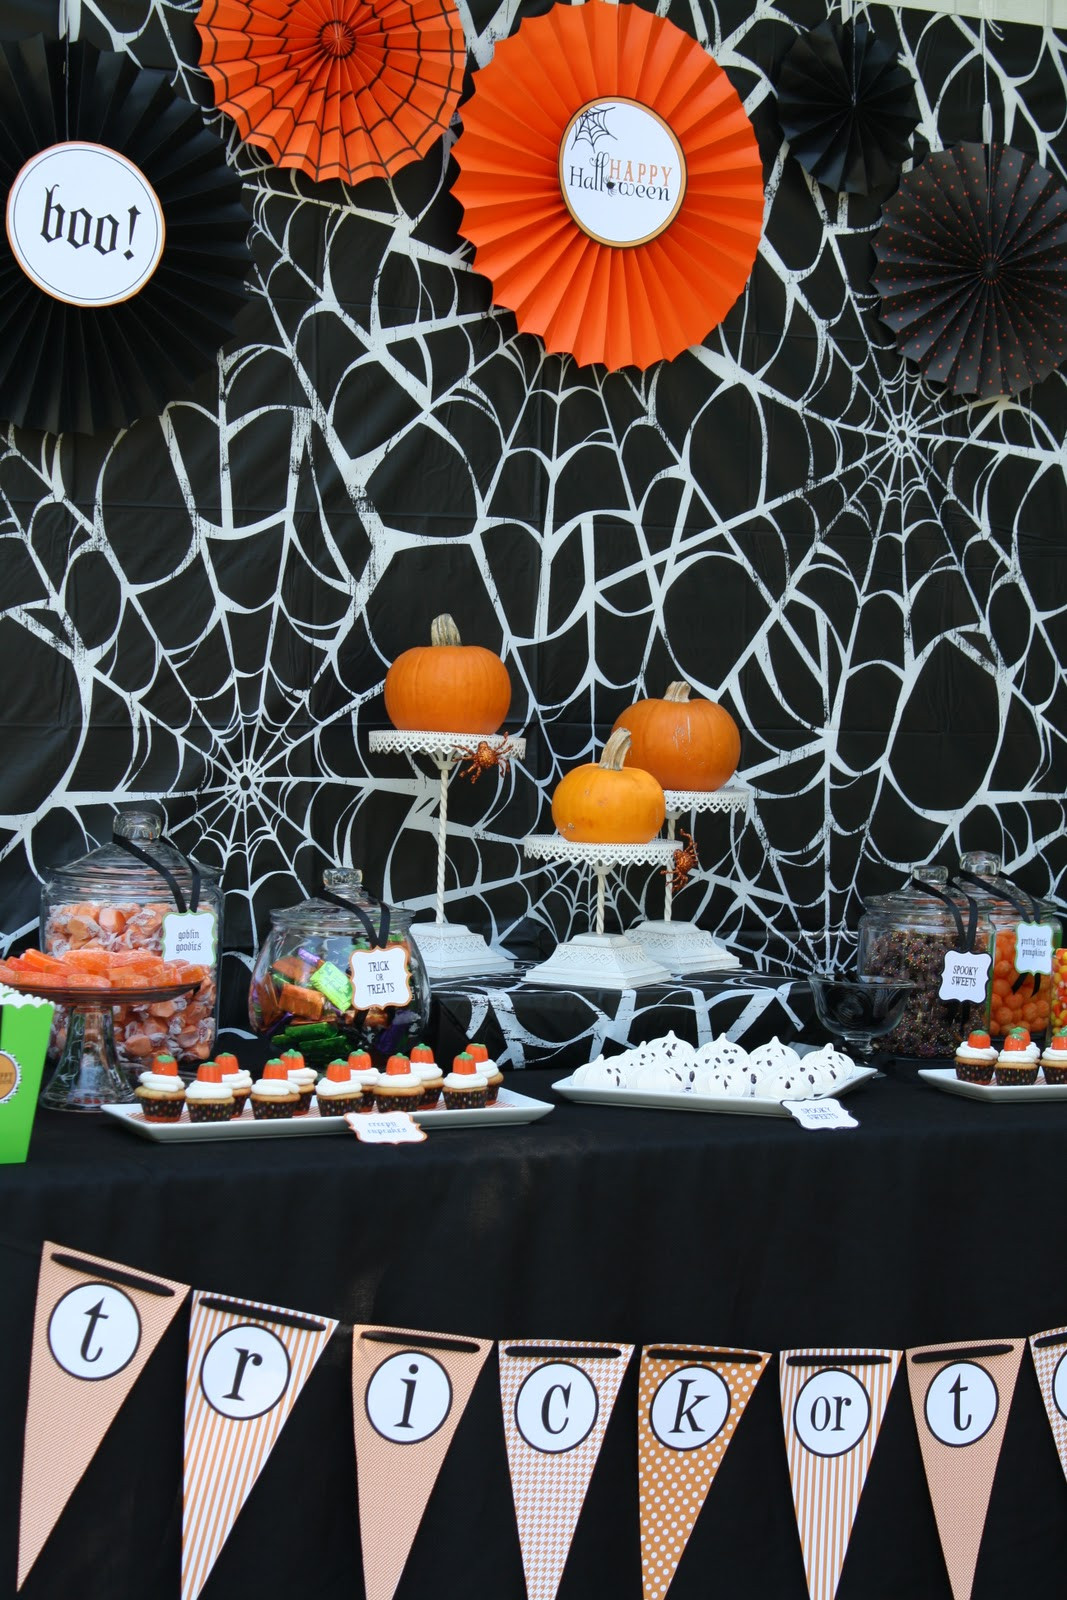 Halloween Party Centerpieces Ideas
 A Halloween Pumpkin Carving Party Anders Ruff Custom